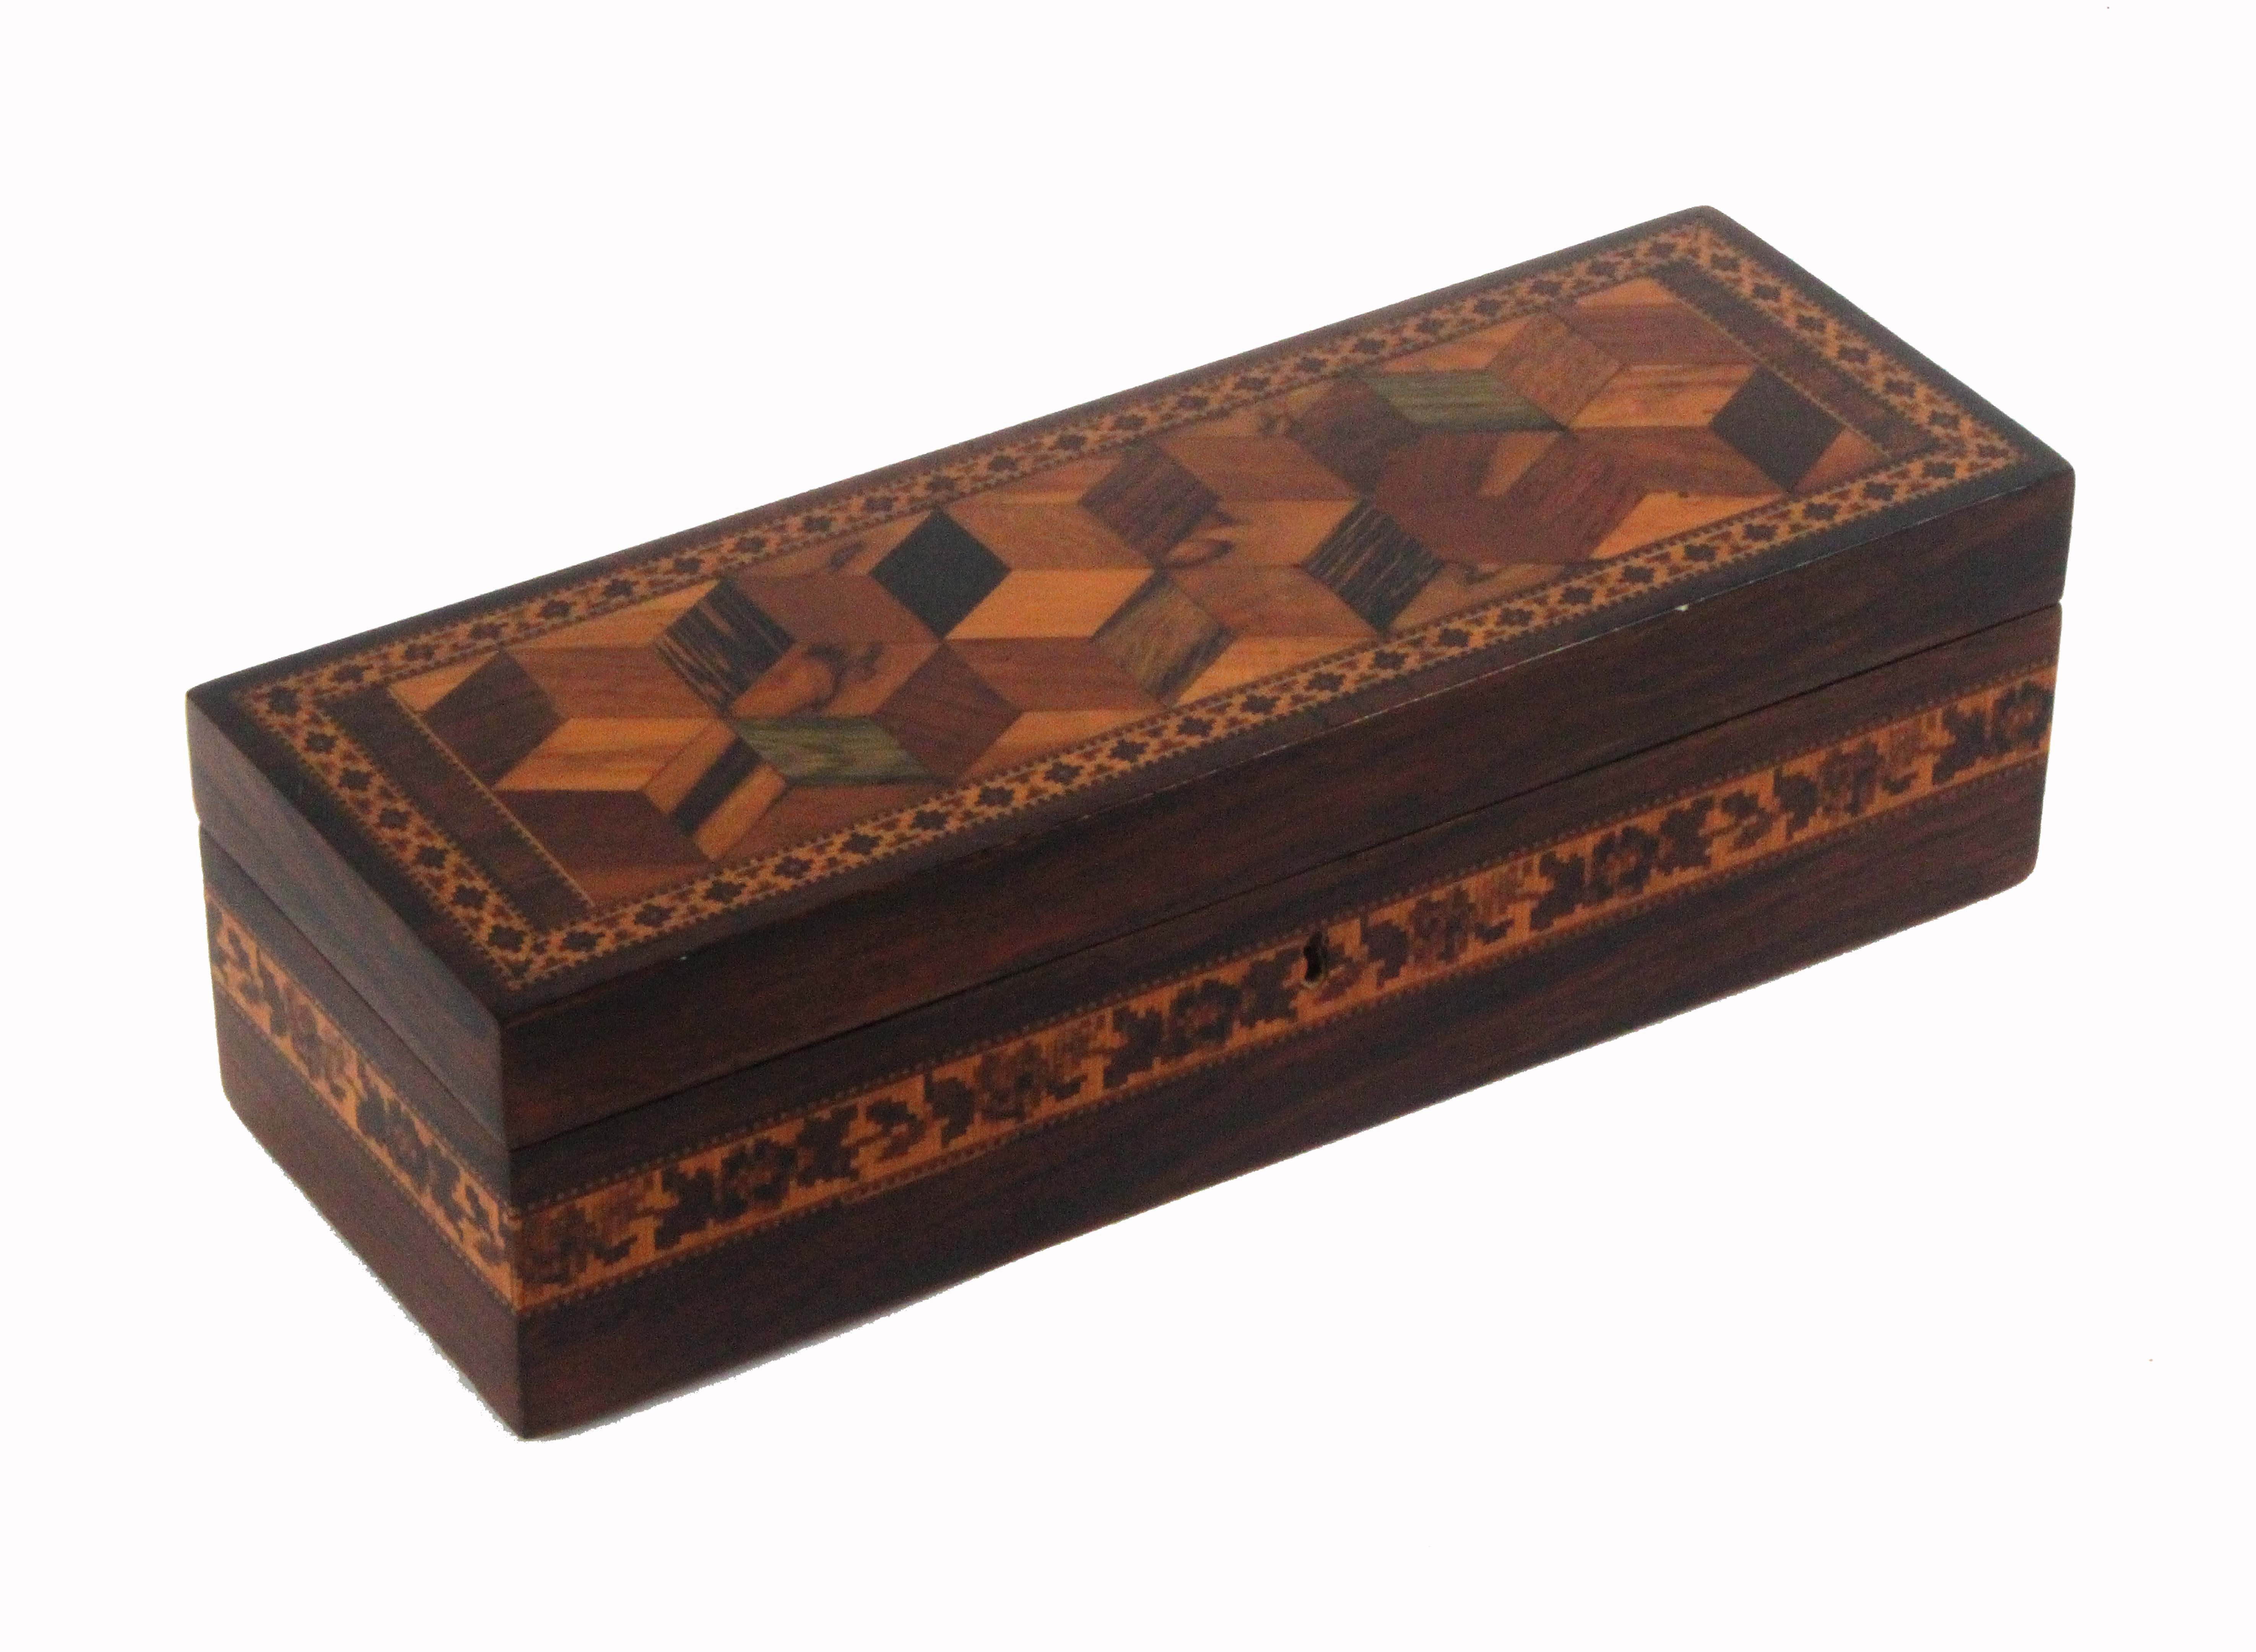 A rosewood Tunbridge ware rectangular box, the lid with a panel of cube work within a geometric